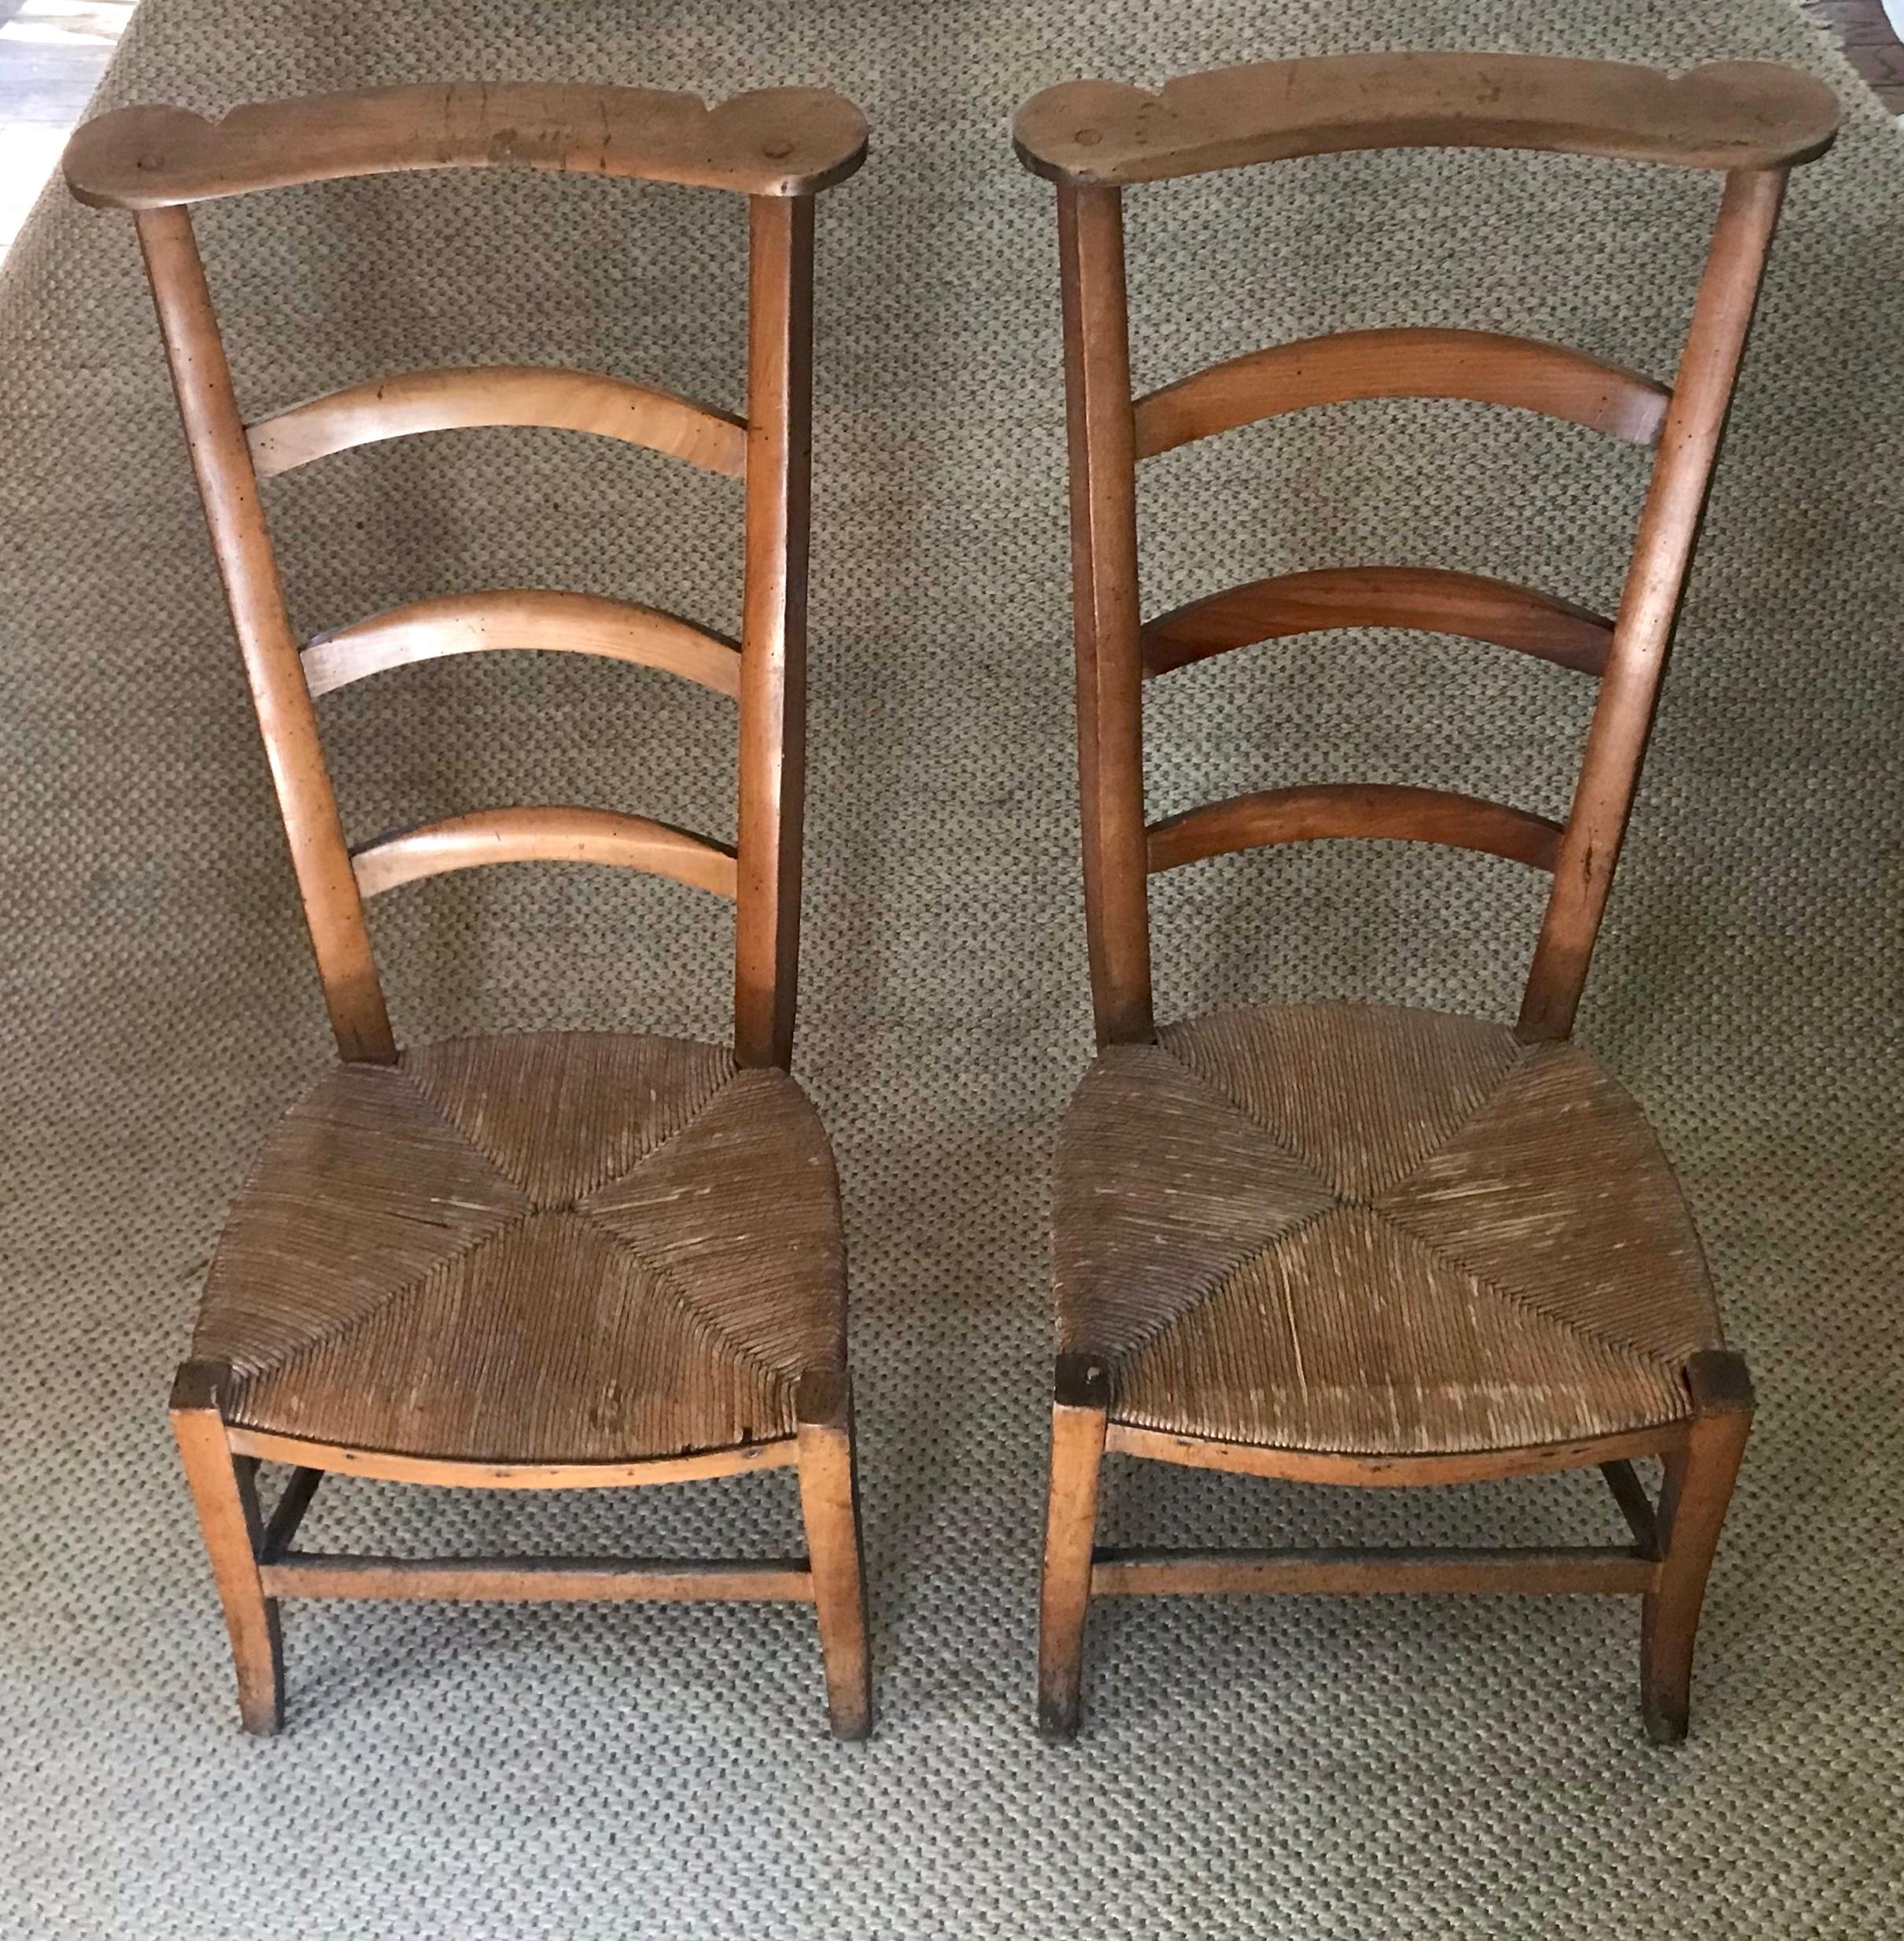 Pair French dressing chairs. Pair vintage French provincial chairs with shaped top rail, ladder back and low rush seat for putting on your boots in the morning at your French chateau and slinging your jacket over the back of the chair. Dior would’ve